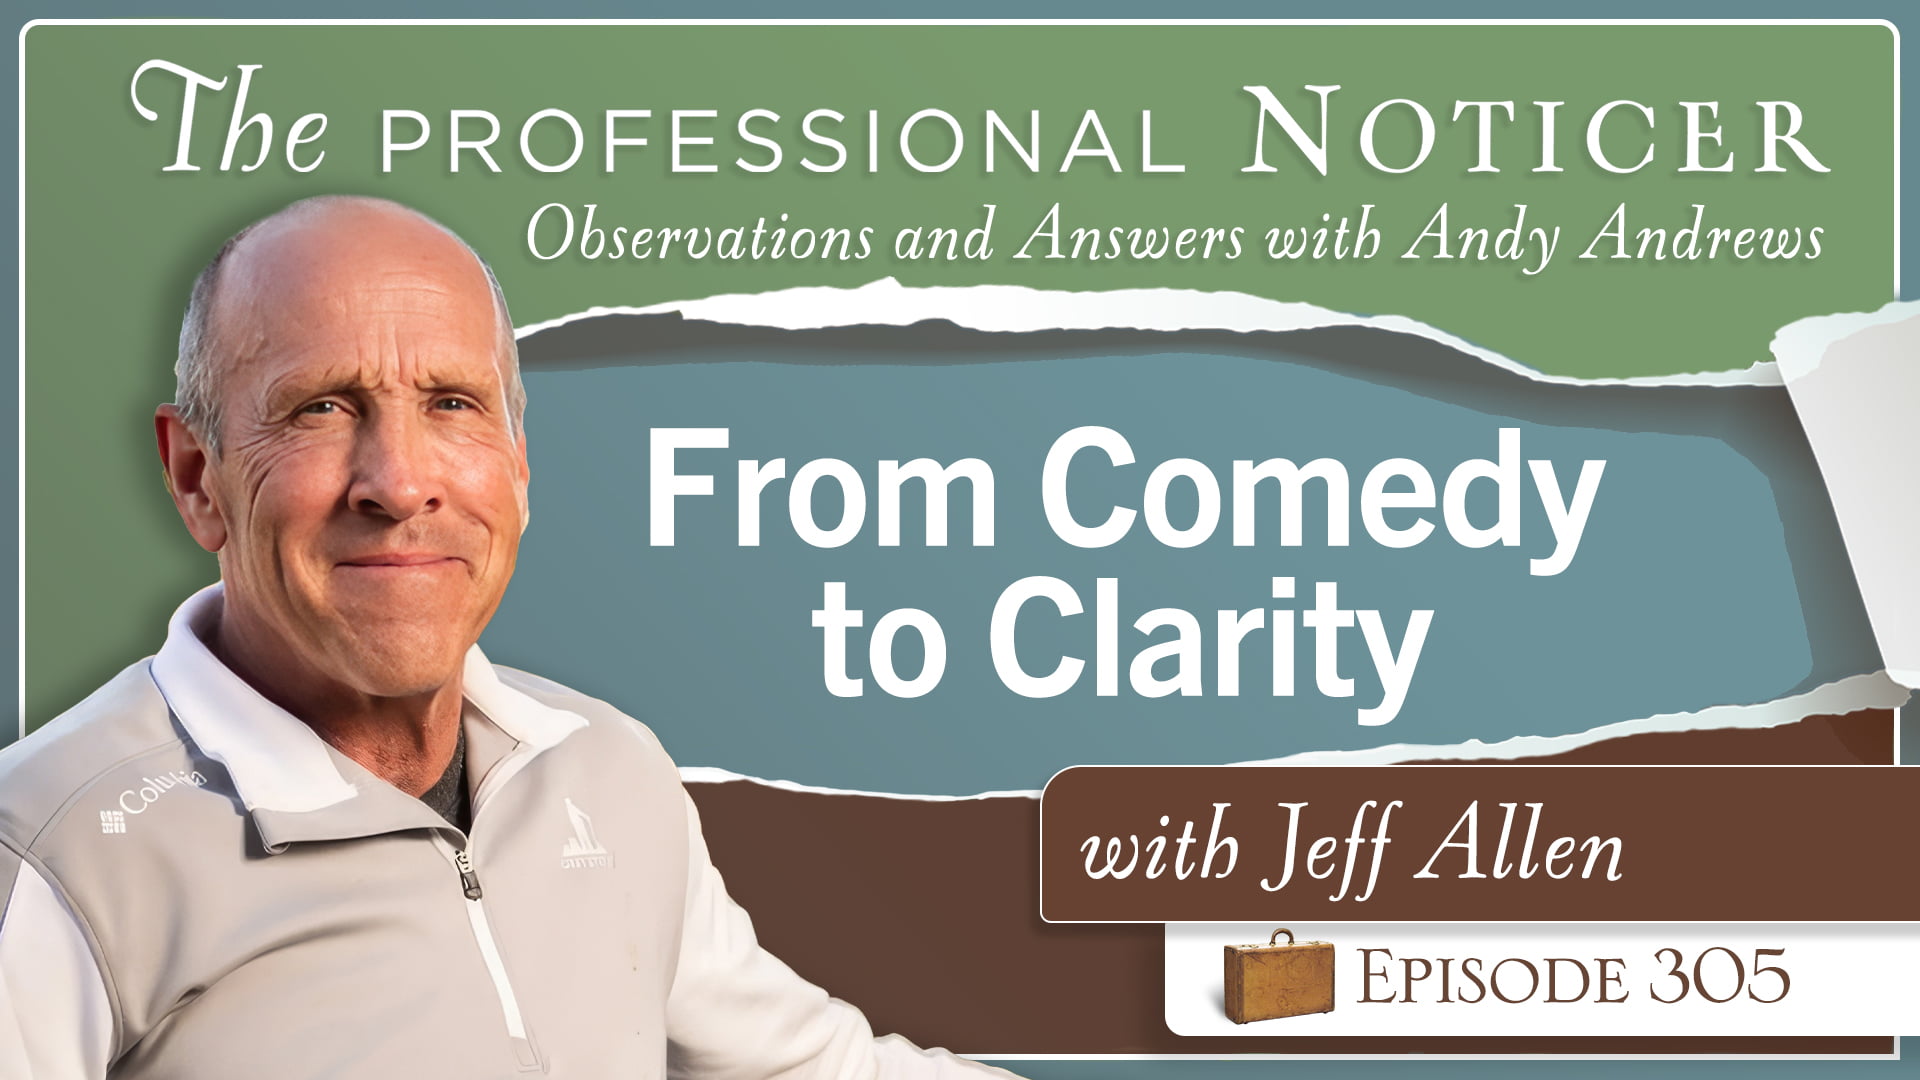 From Comedy to Clarity with Jeff Allen